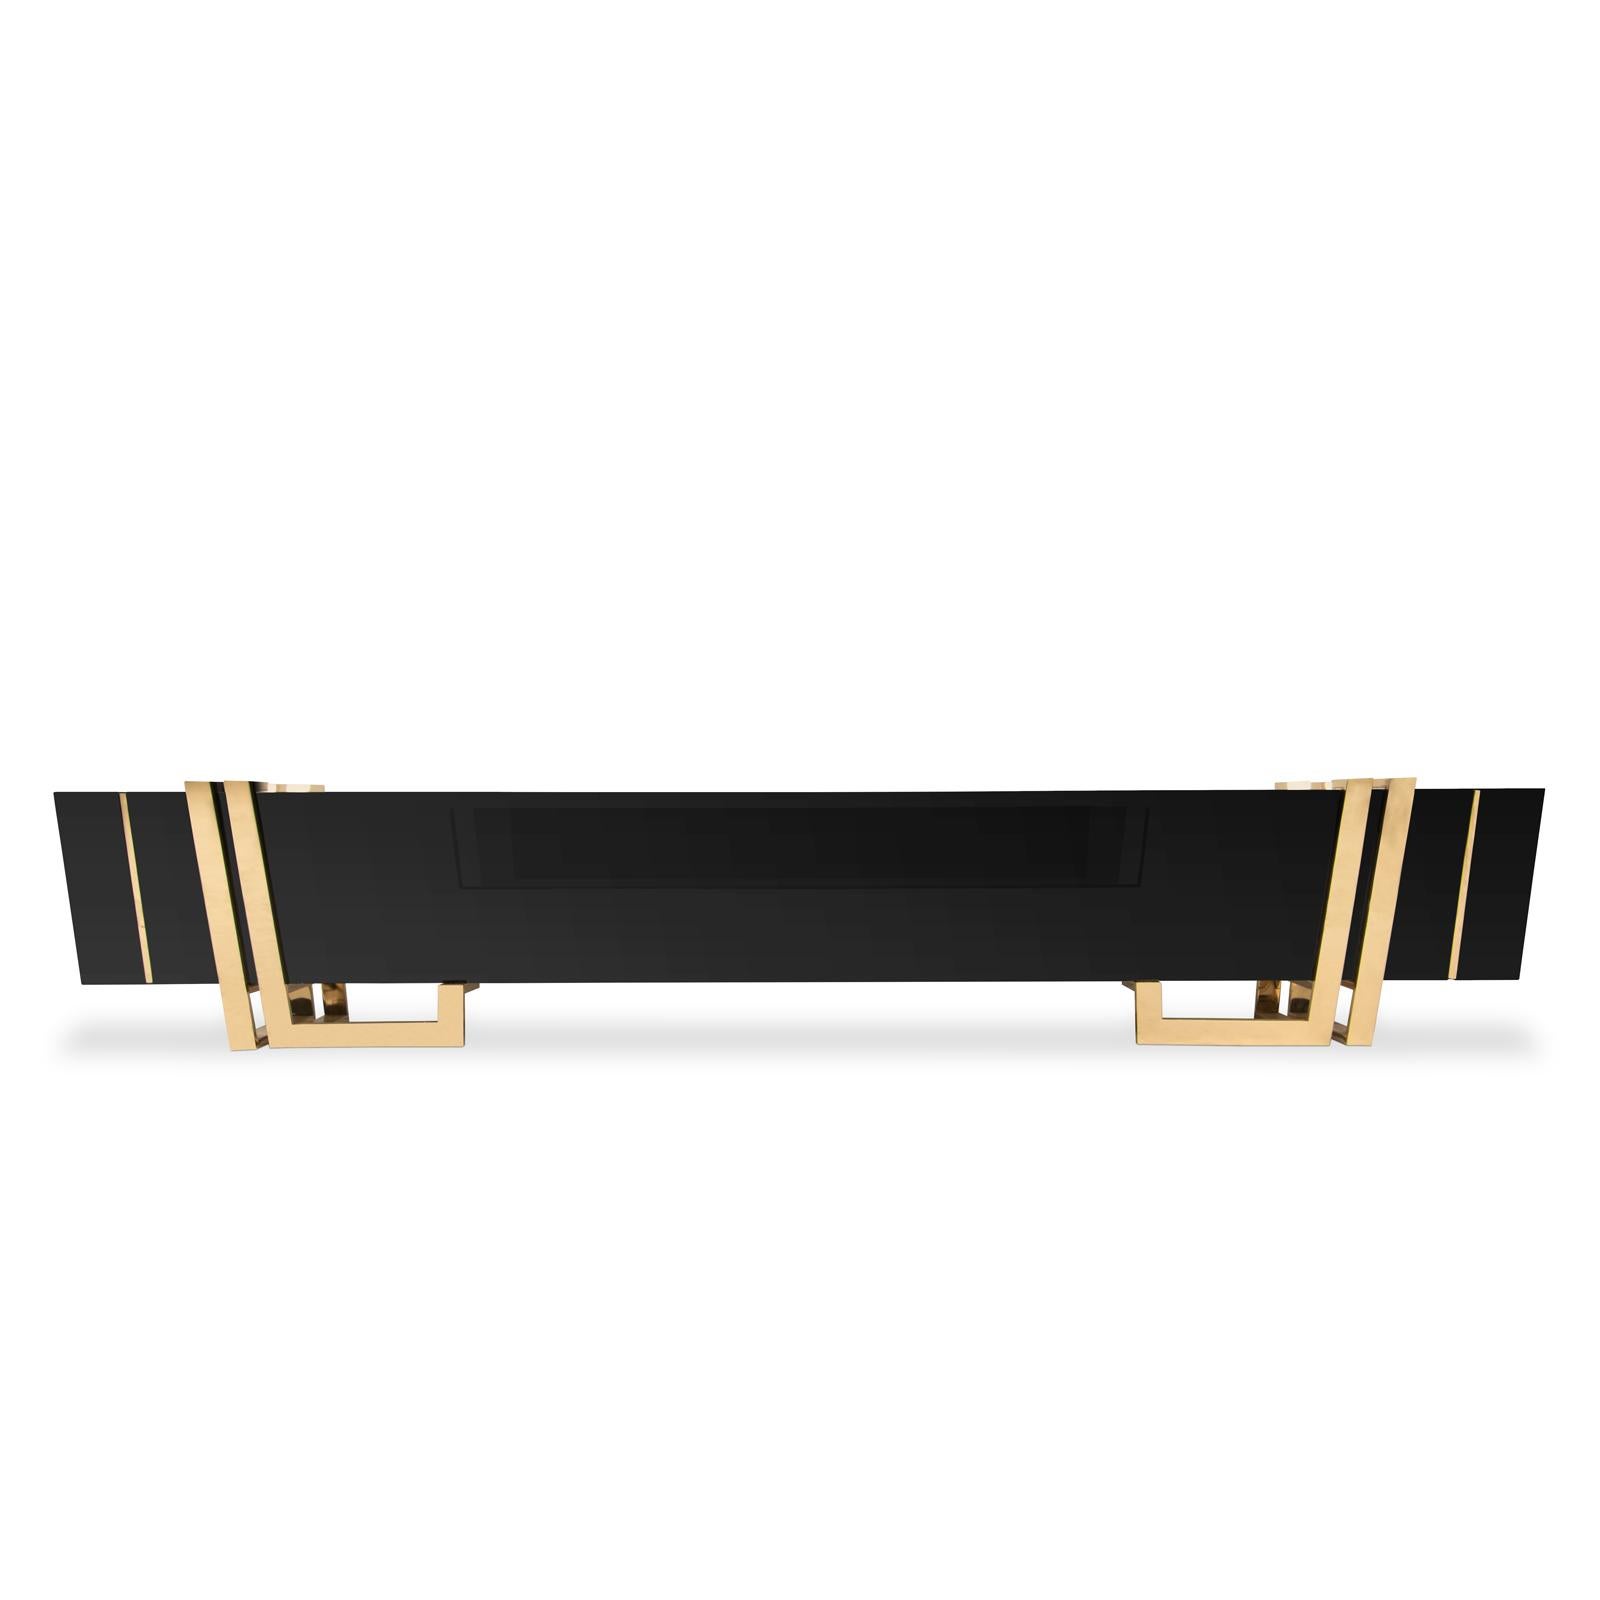 TV Sideboard Partenon with black marble top, nero marquina marble and with solid
black lacquered wood frame. With subtle lines in gold plated polished brass and with
gold plated solid polished brass feet.